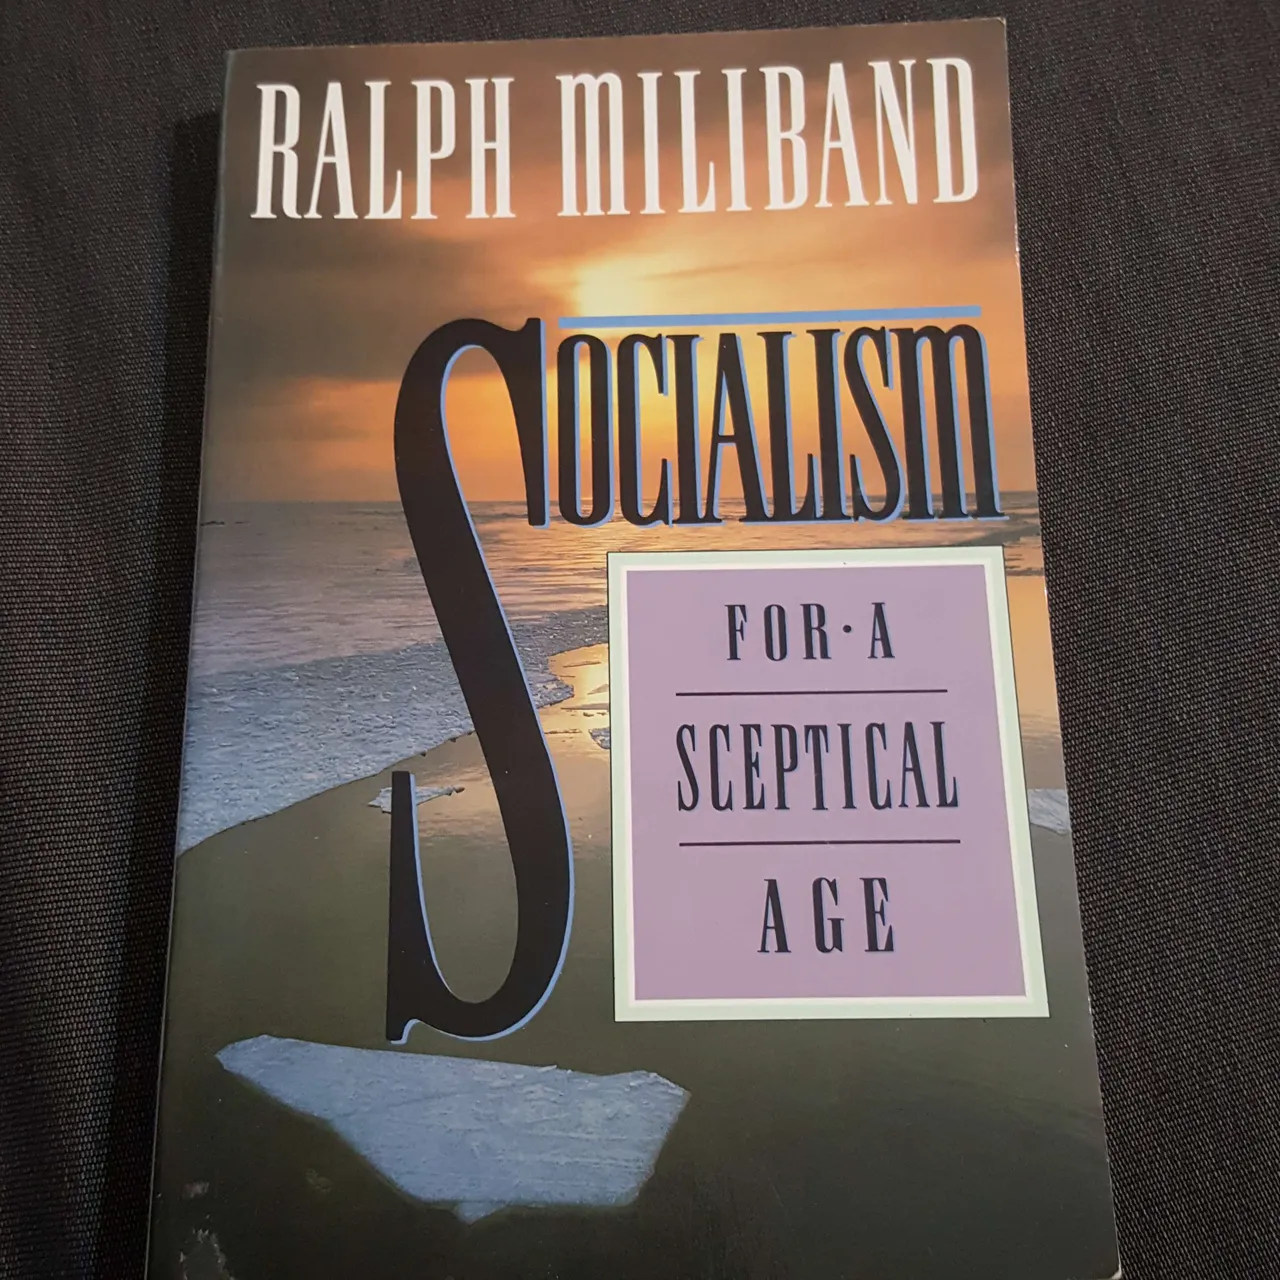 Socialism for a Sceptical Age by Ralph Miliband photo 1